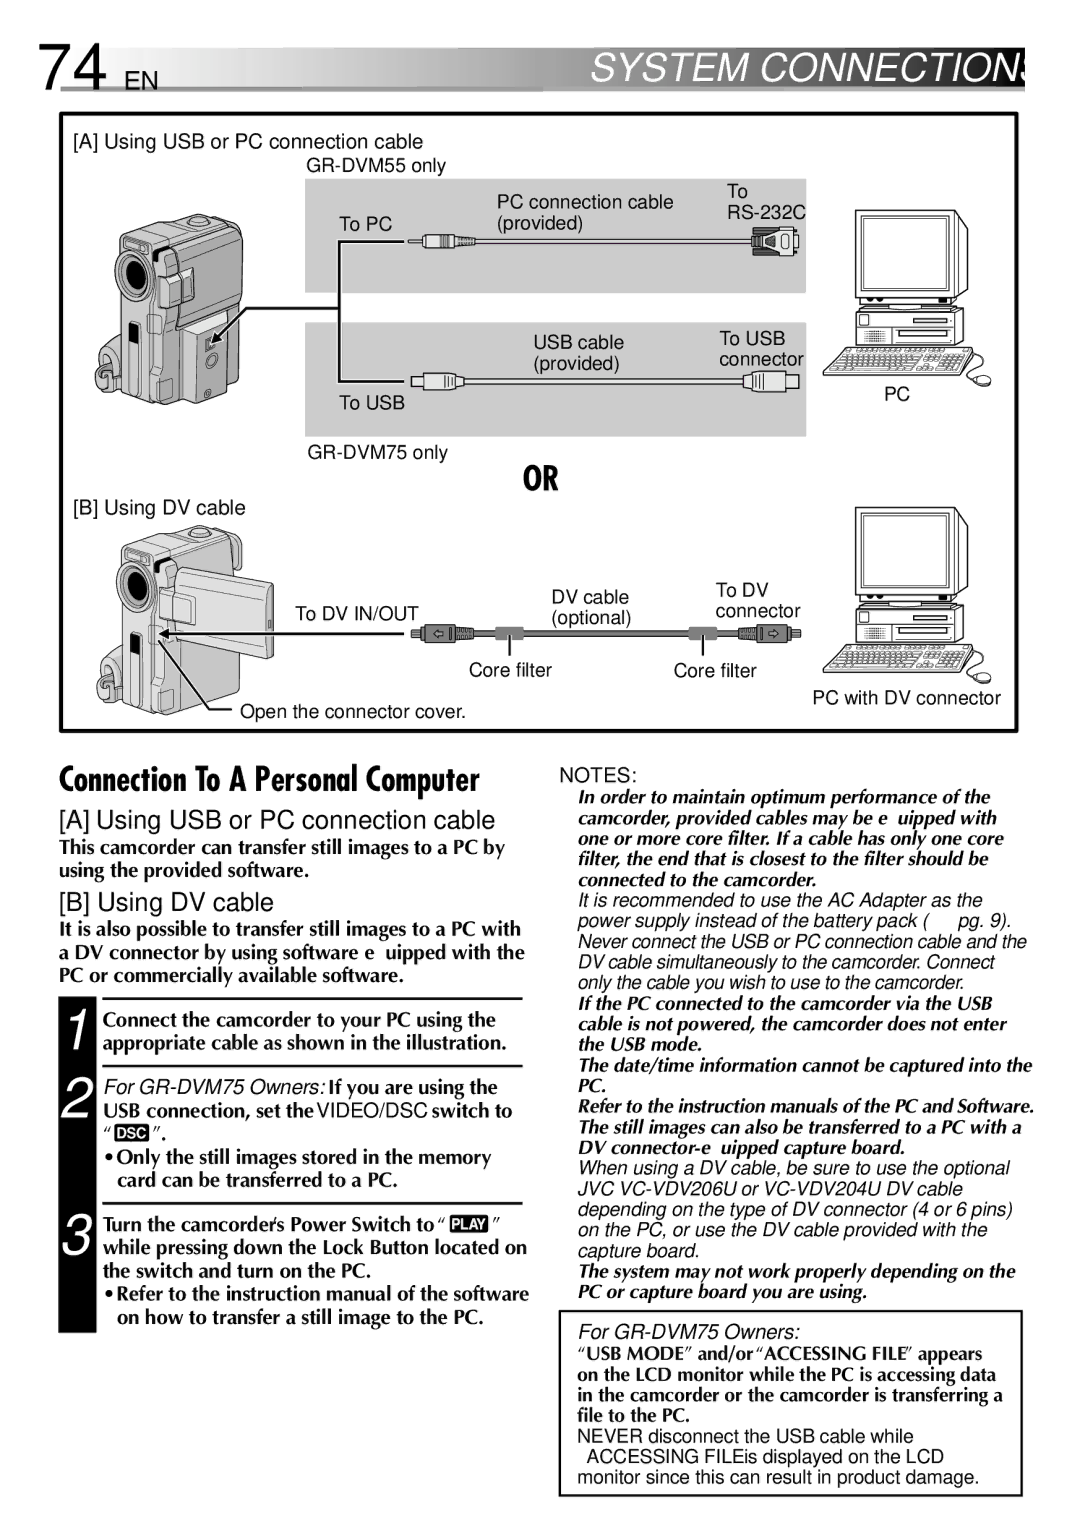 JVC specifications Using USB or PC connection cable, Using DV cable, For GR-DVM75 Owners 